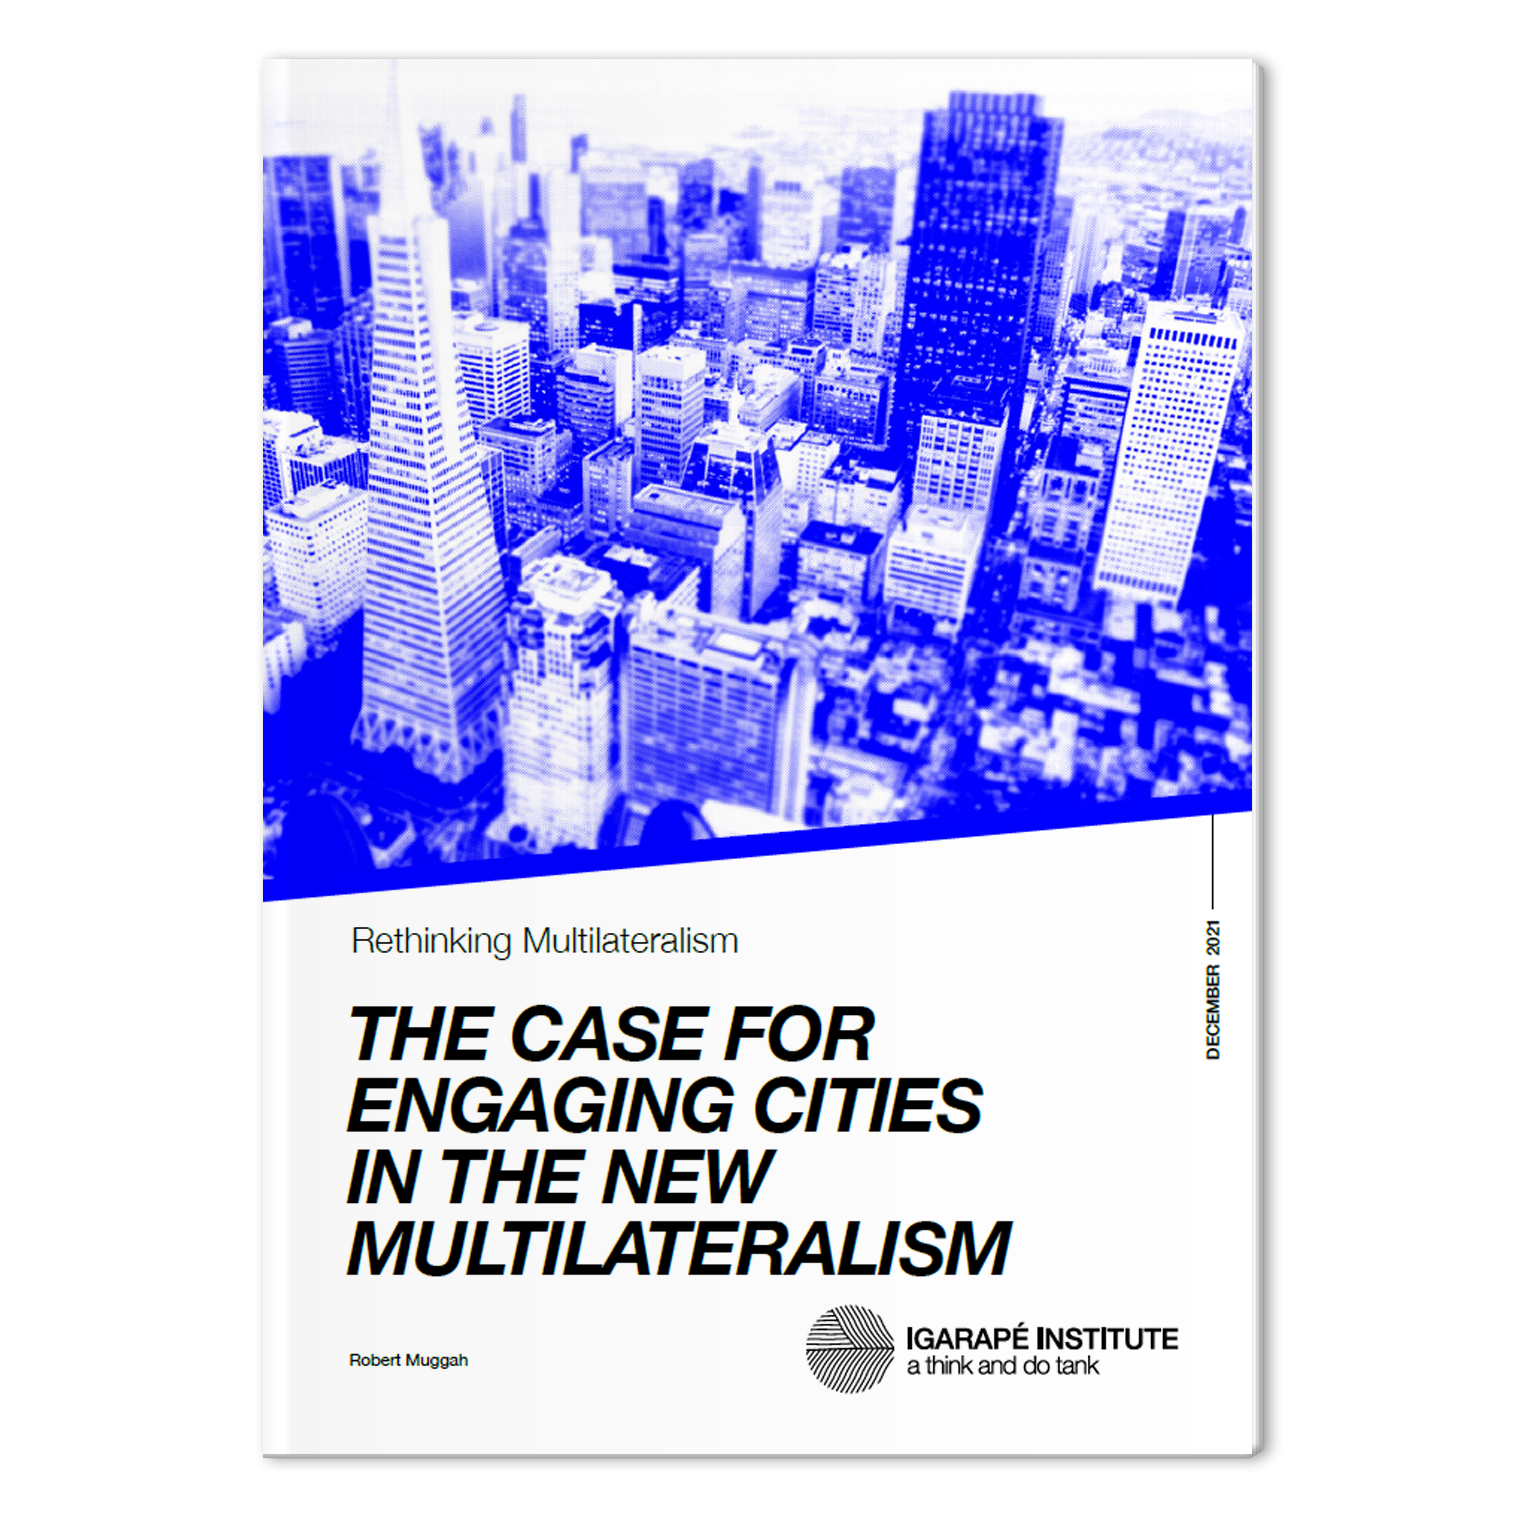 The case for engaging cities in the new multilateralism